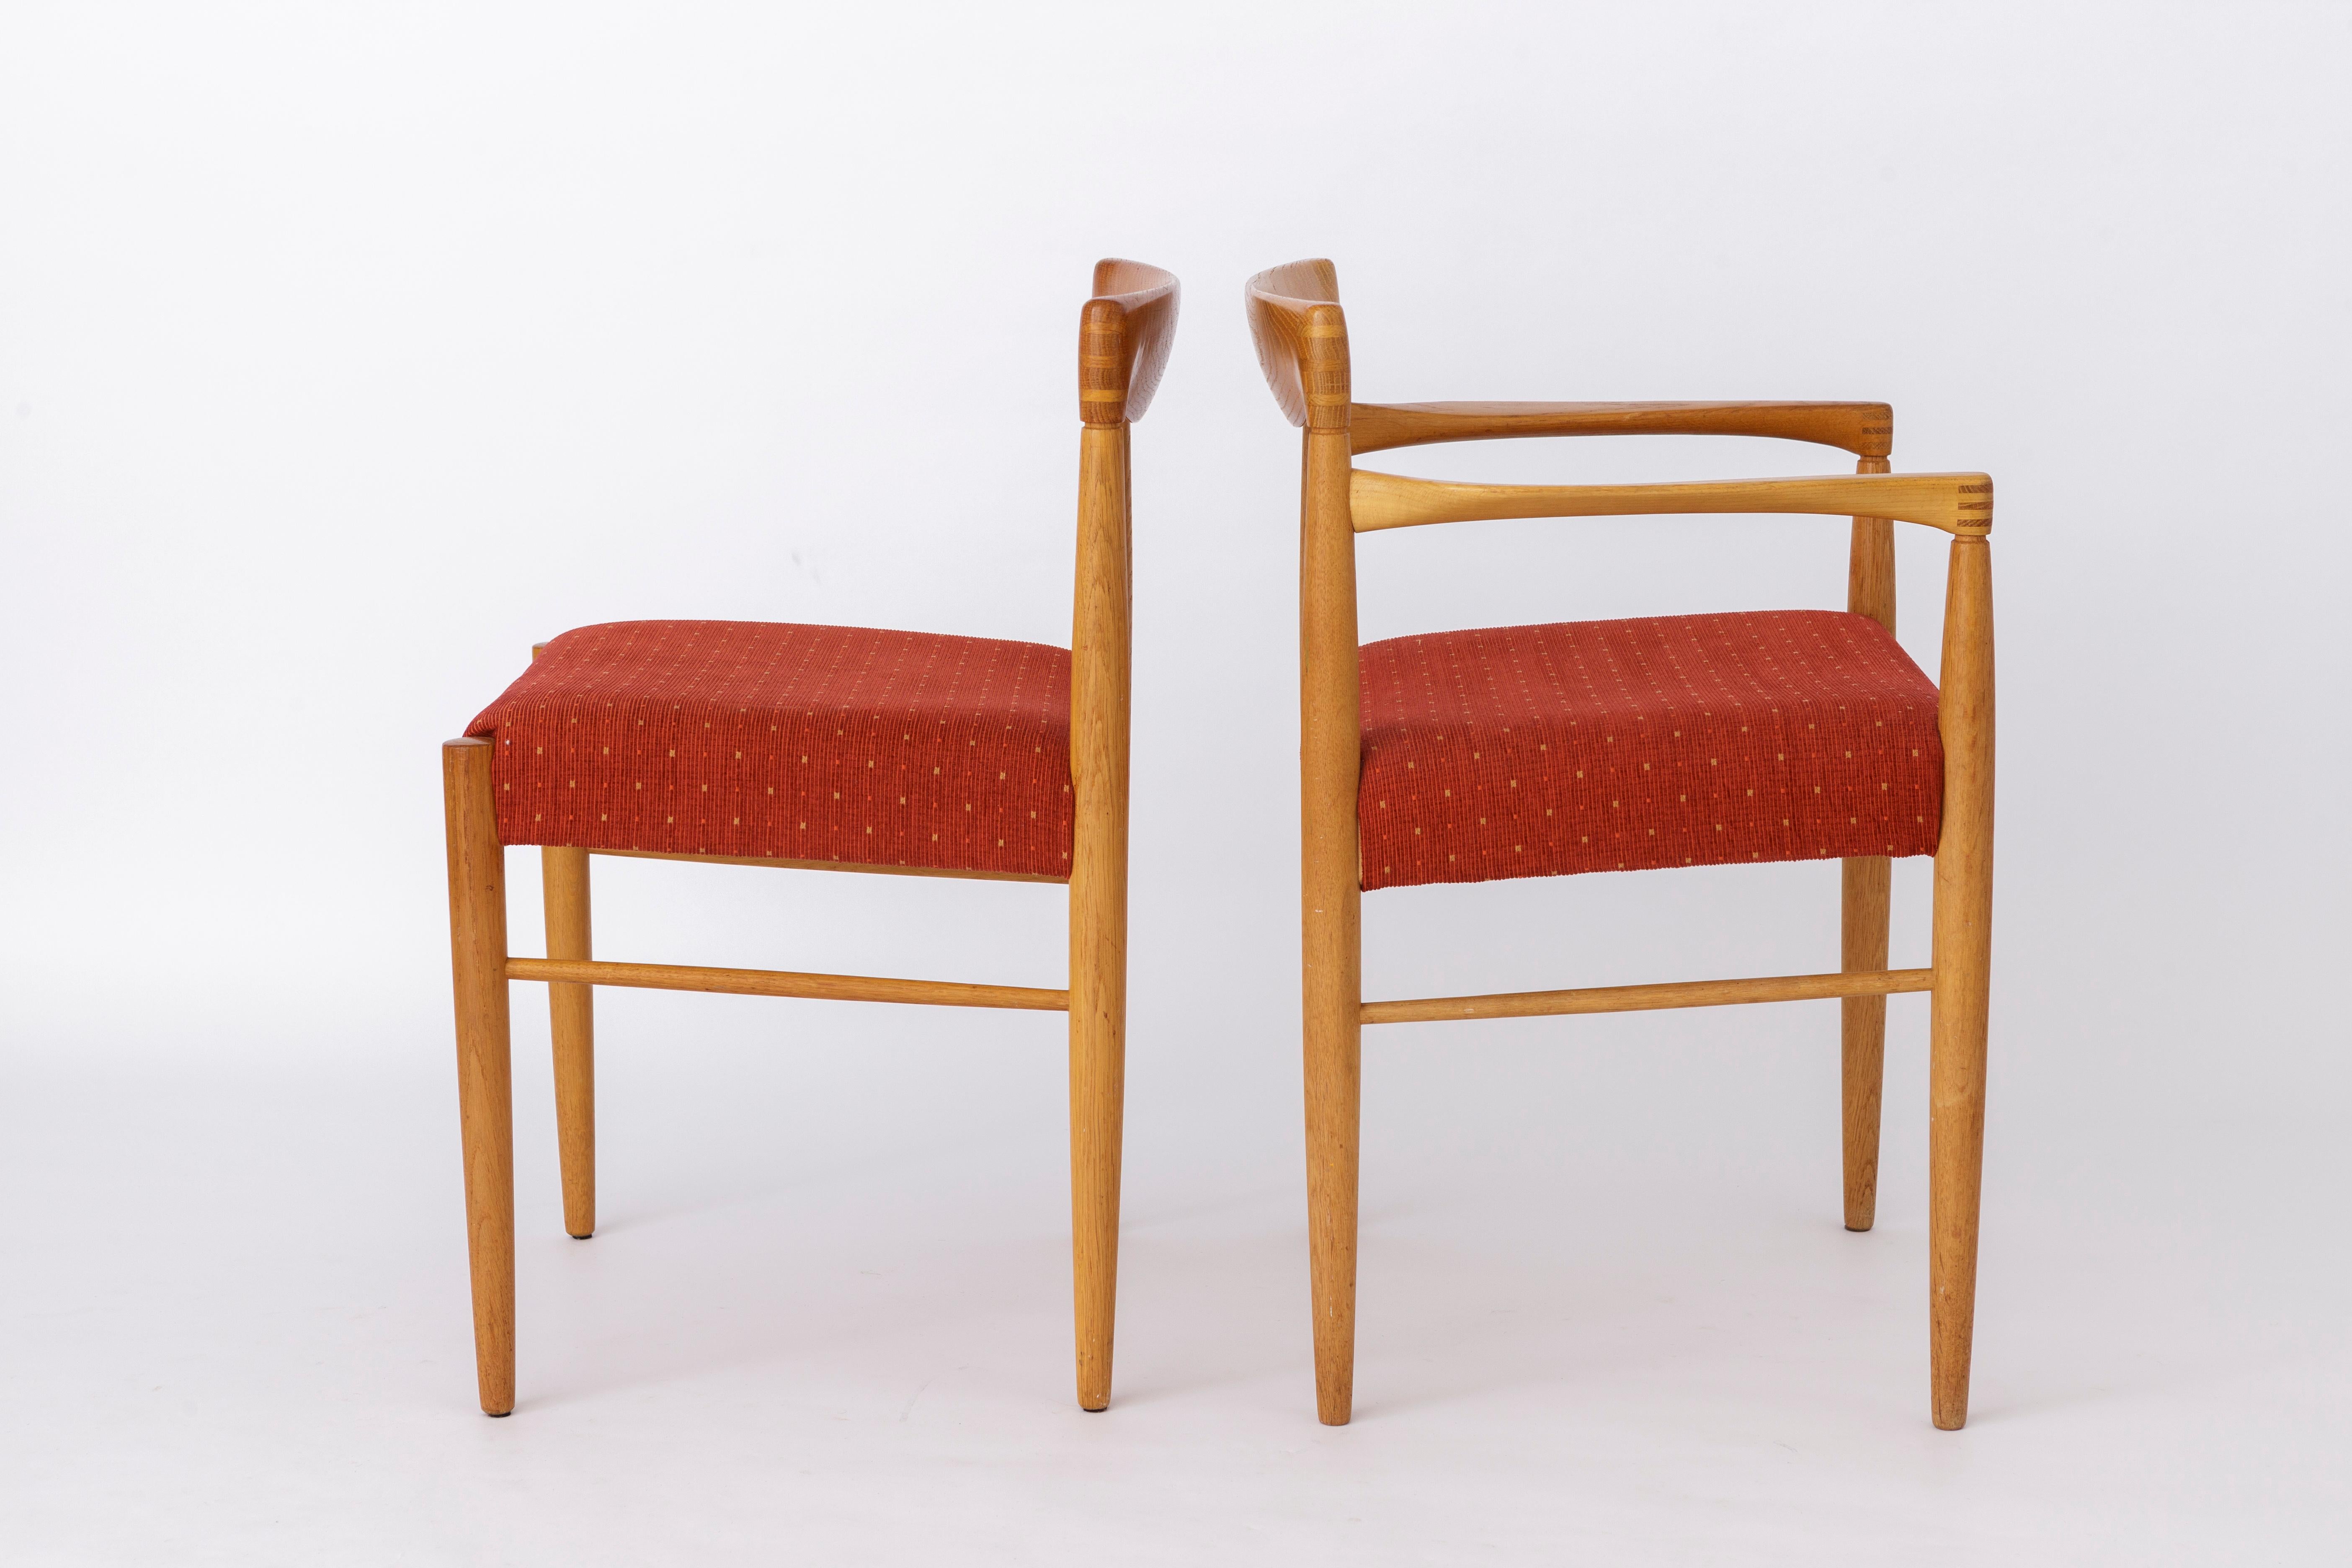 Working on a set of 8 Bramin chairs. One armchair + 7 side chairs. 
On the photos you see 2 chairs from the whole set. All chairs are in same good condition.  
Design: by Danish architect Henry Walter Klein in the 1960s. 
Displayed price is for a